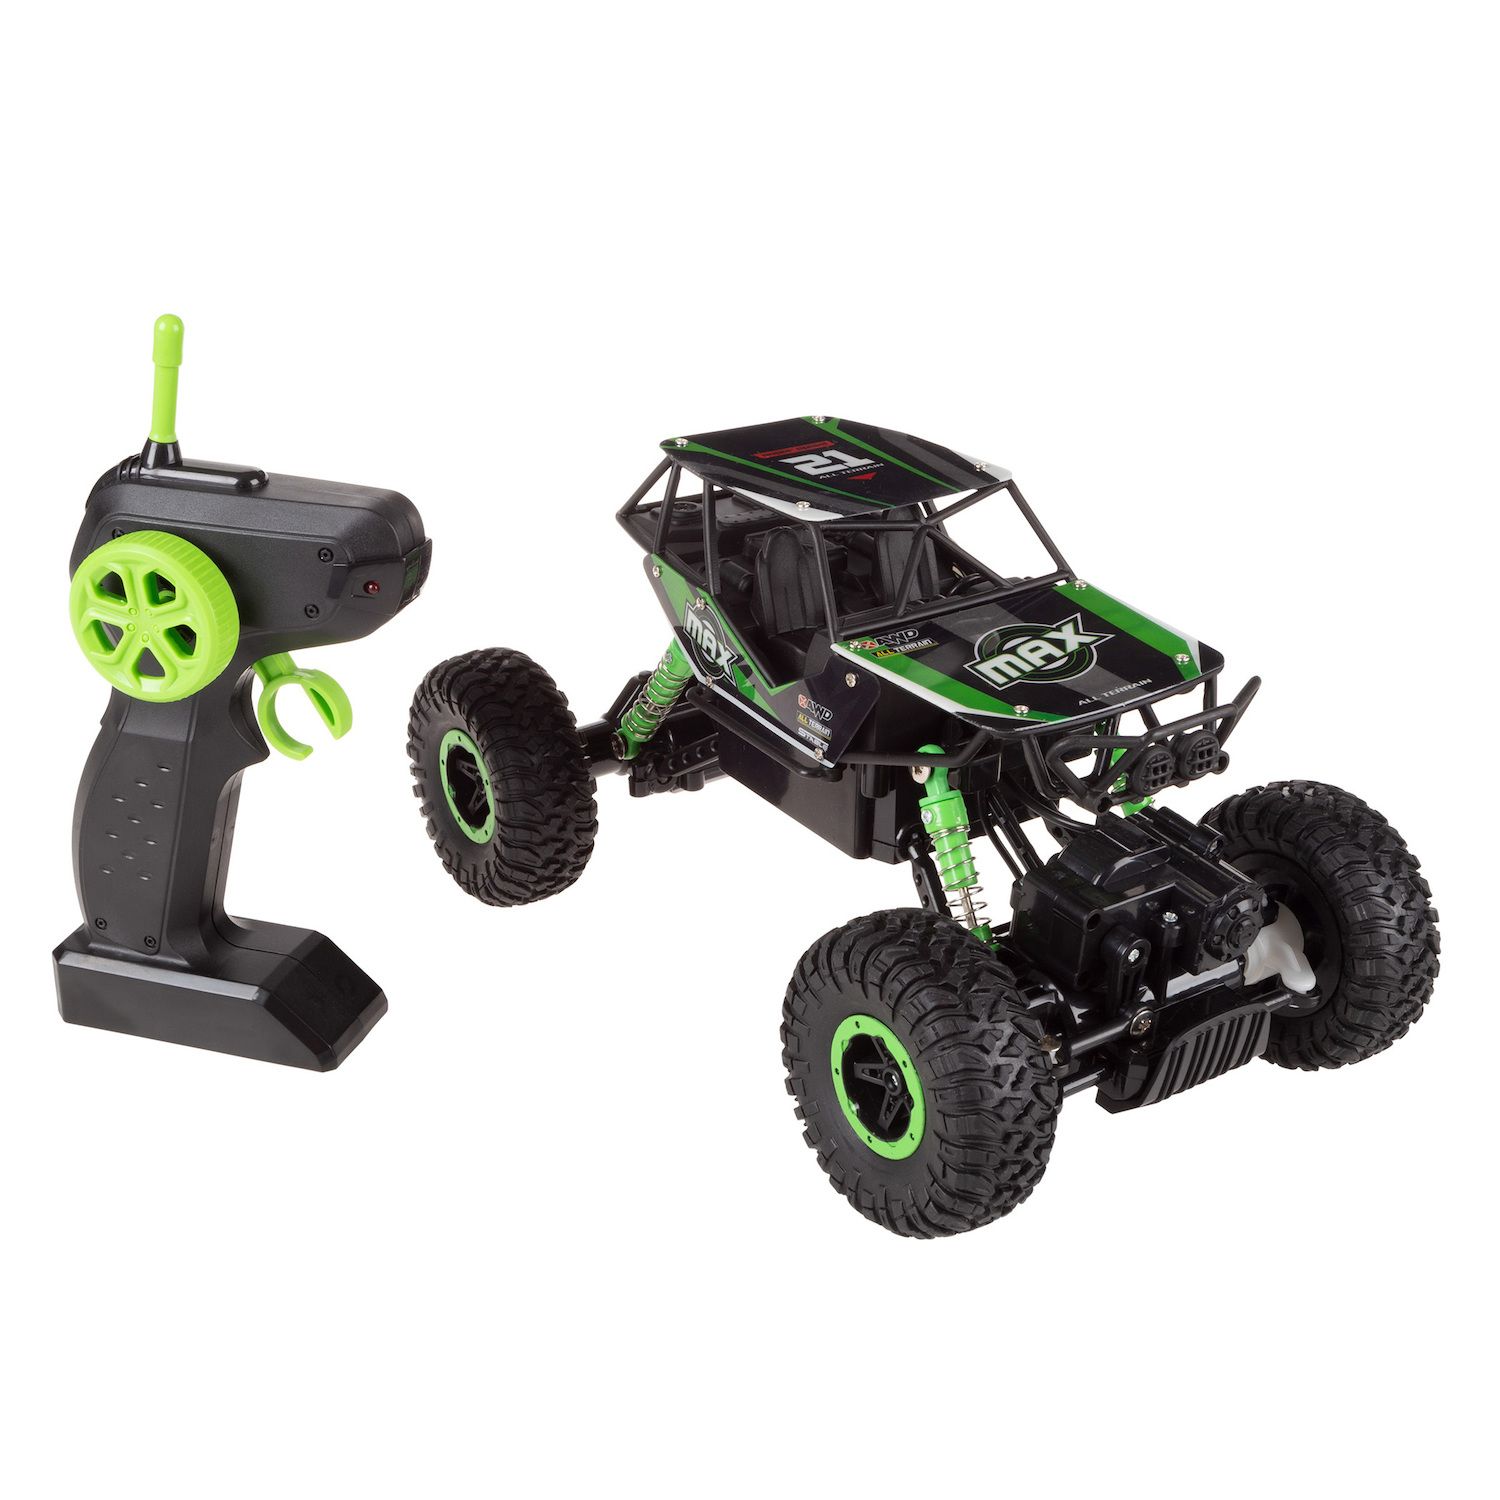 Image for Hey! Play! Remote Control Monster Truck - 1:16 Scale, 2.4 GHz RC Off-Road Rugged Toy Vehicle with Spring Suspension & Oversized Wheels at Kohl's.